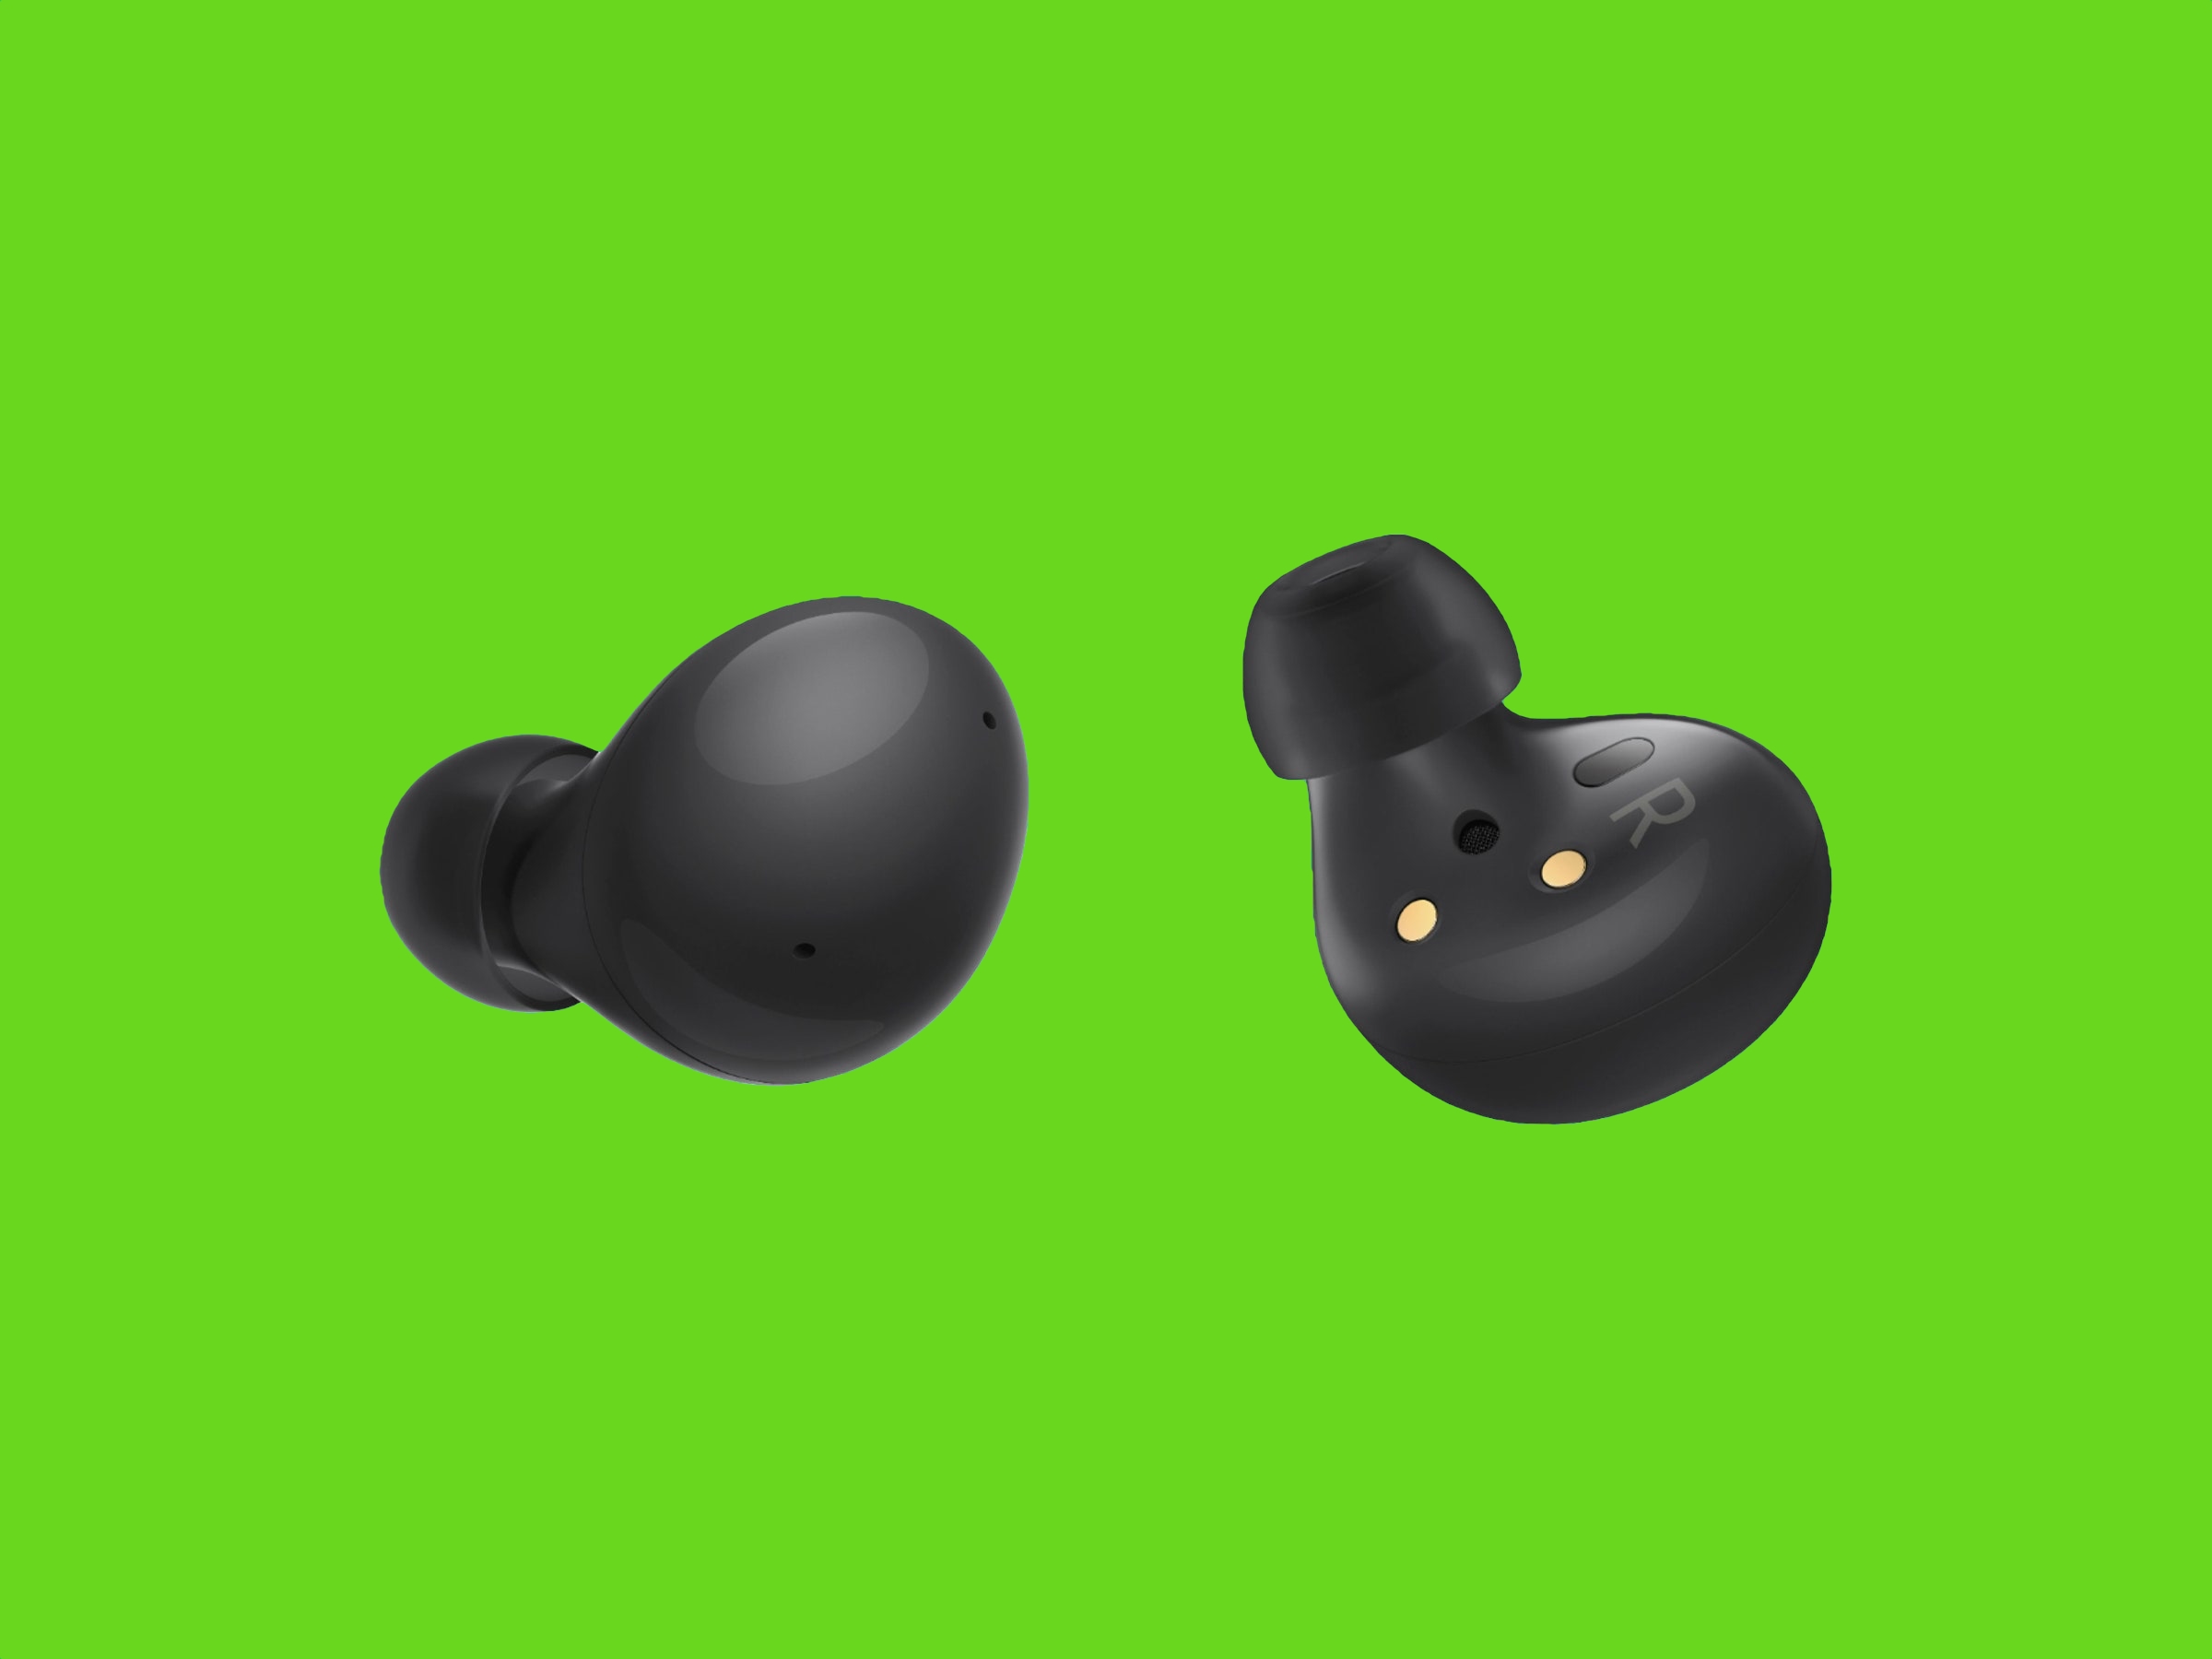 Rumour: Samsung is working on new TWS Galaxy Buds, possibly to be unveiled alongside Galaxy Fold 5 and Galaxy Flip 5